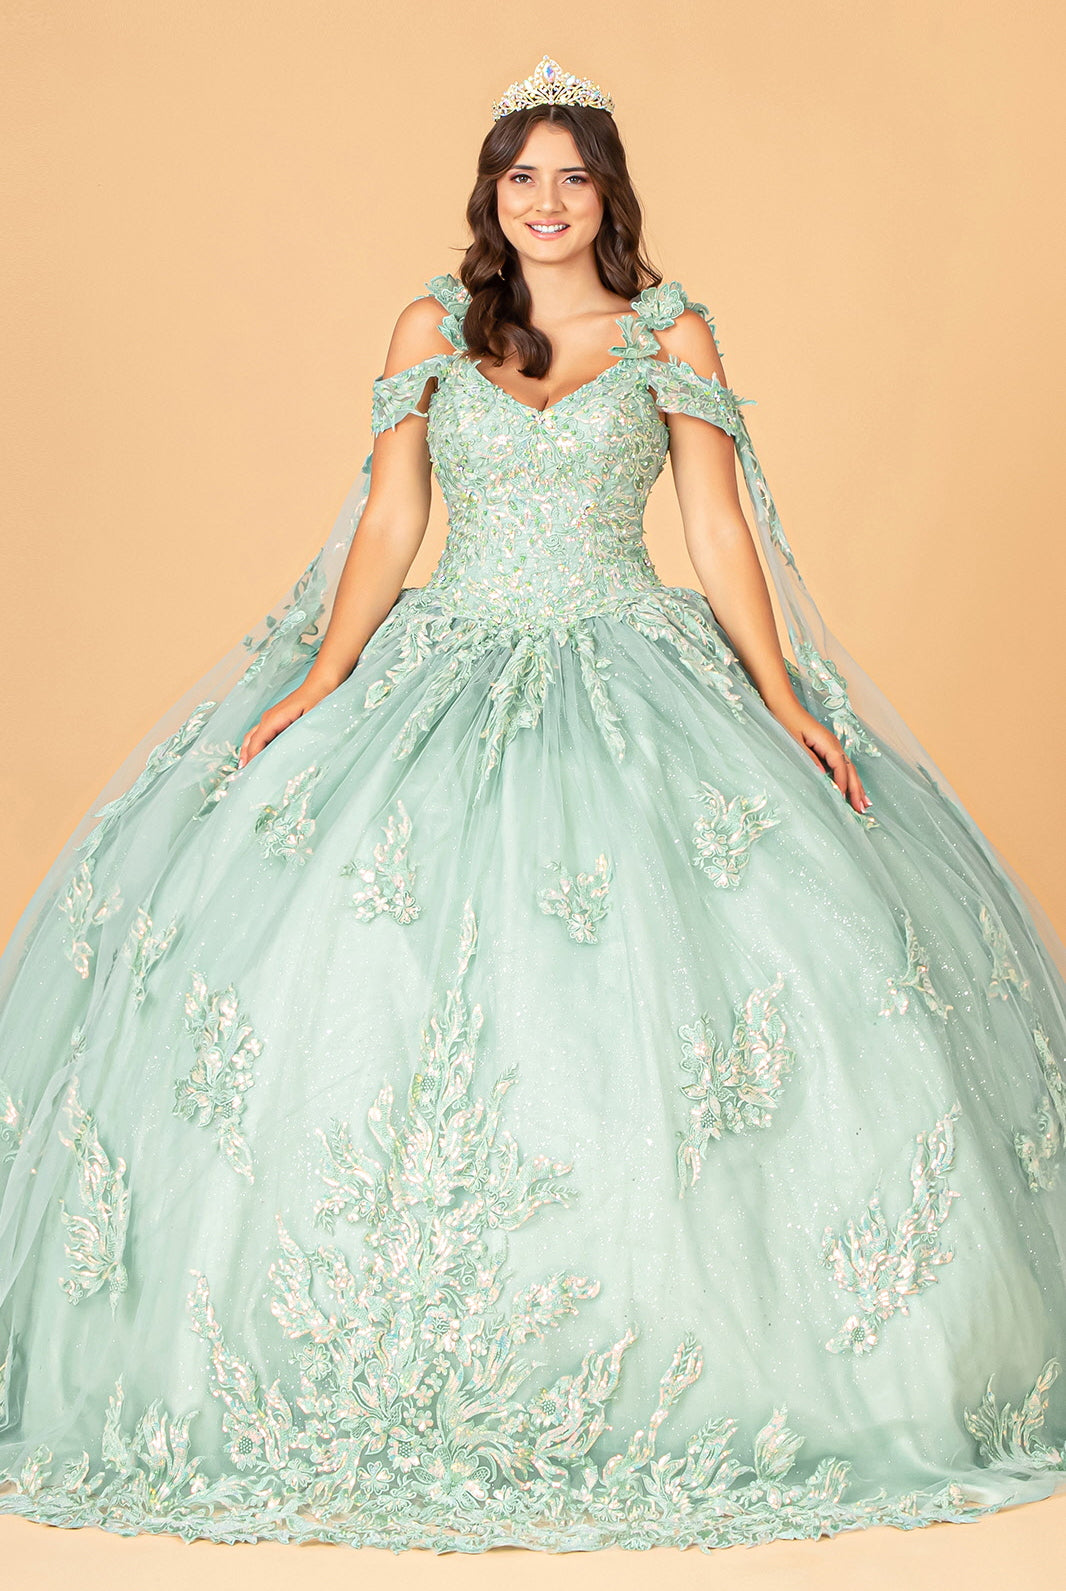 3D Flower Applique Mesh Quinceanera Ball Gown with Side Mesh Drapes GLGL3099-QUINCEANERA-smcfashion.com